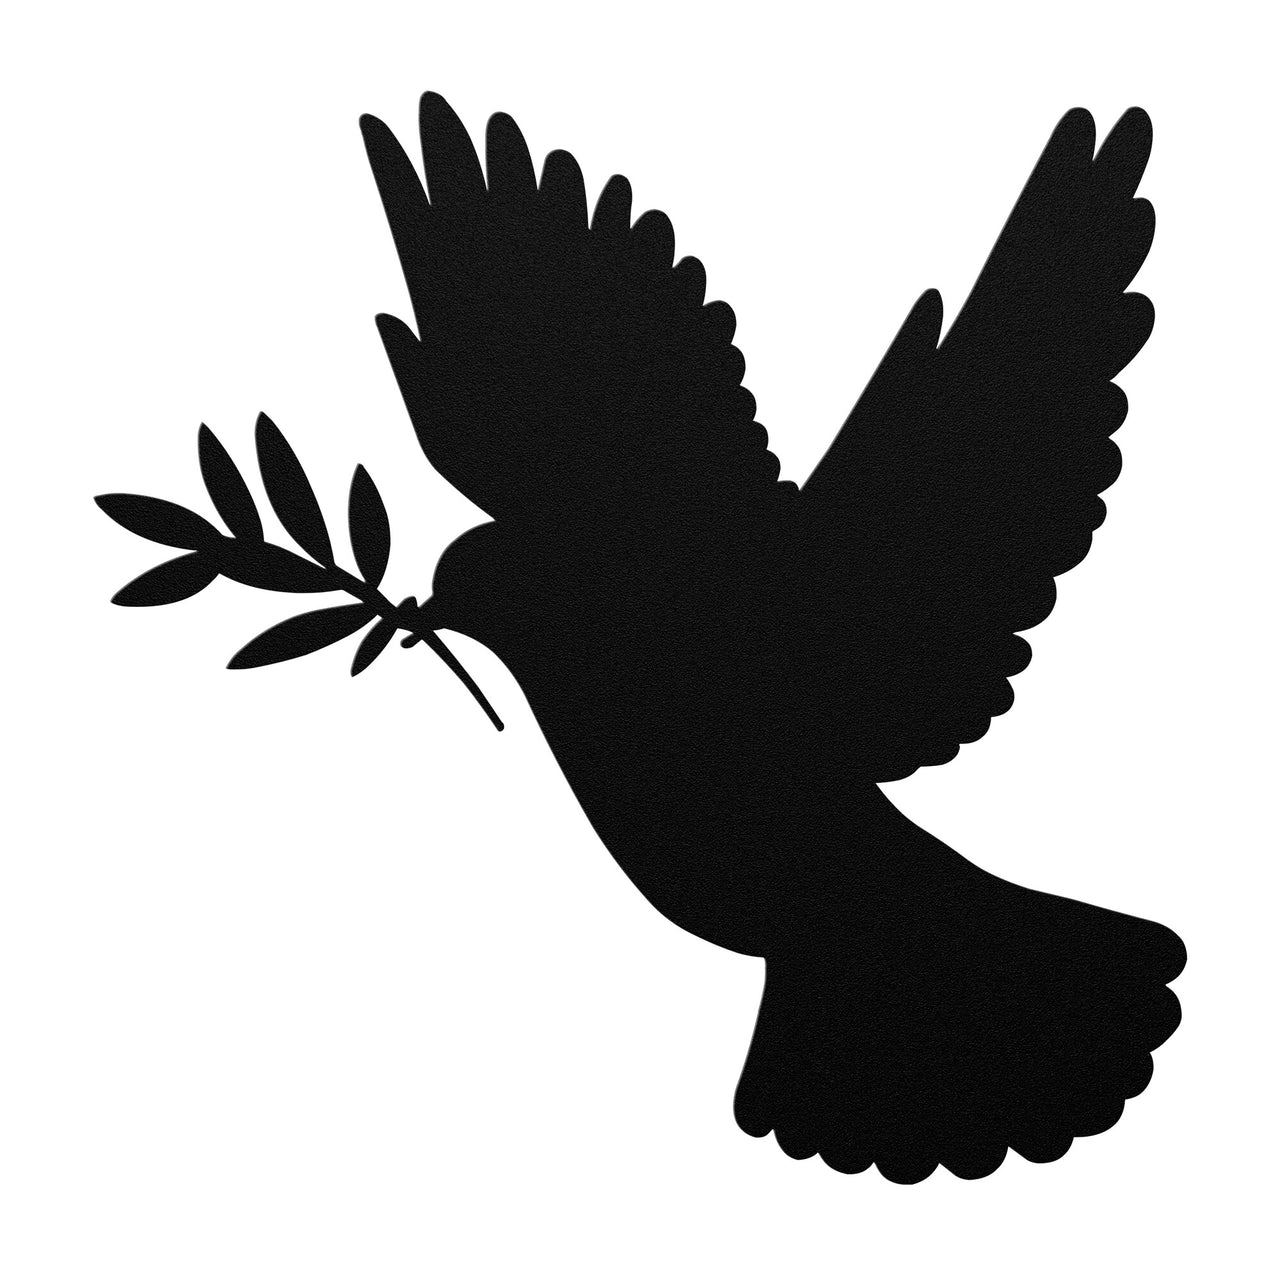 Dove with olive branch silhouette